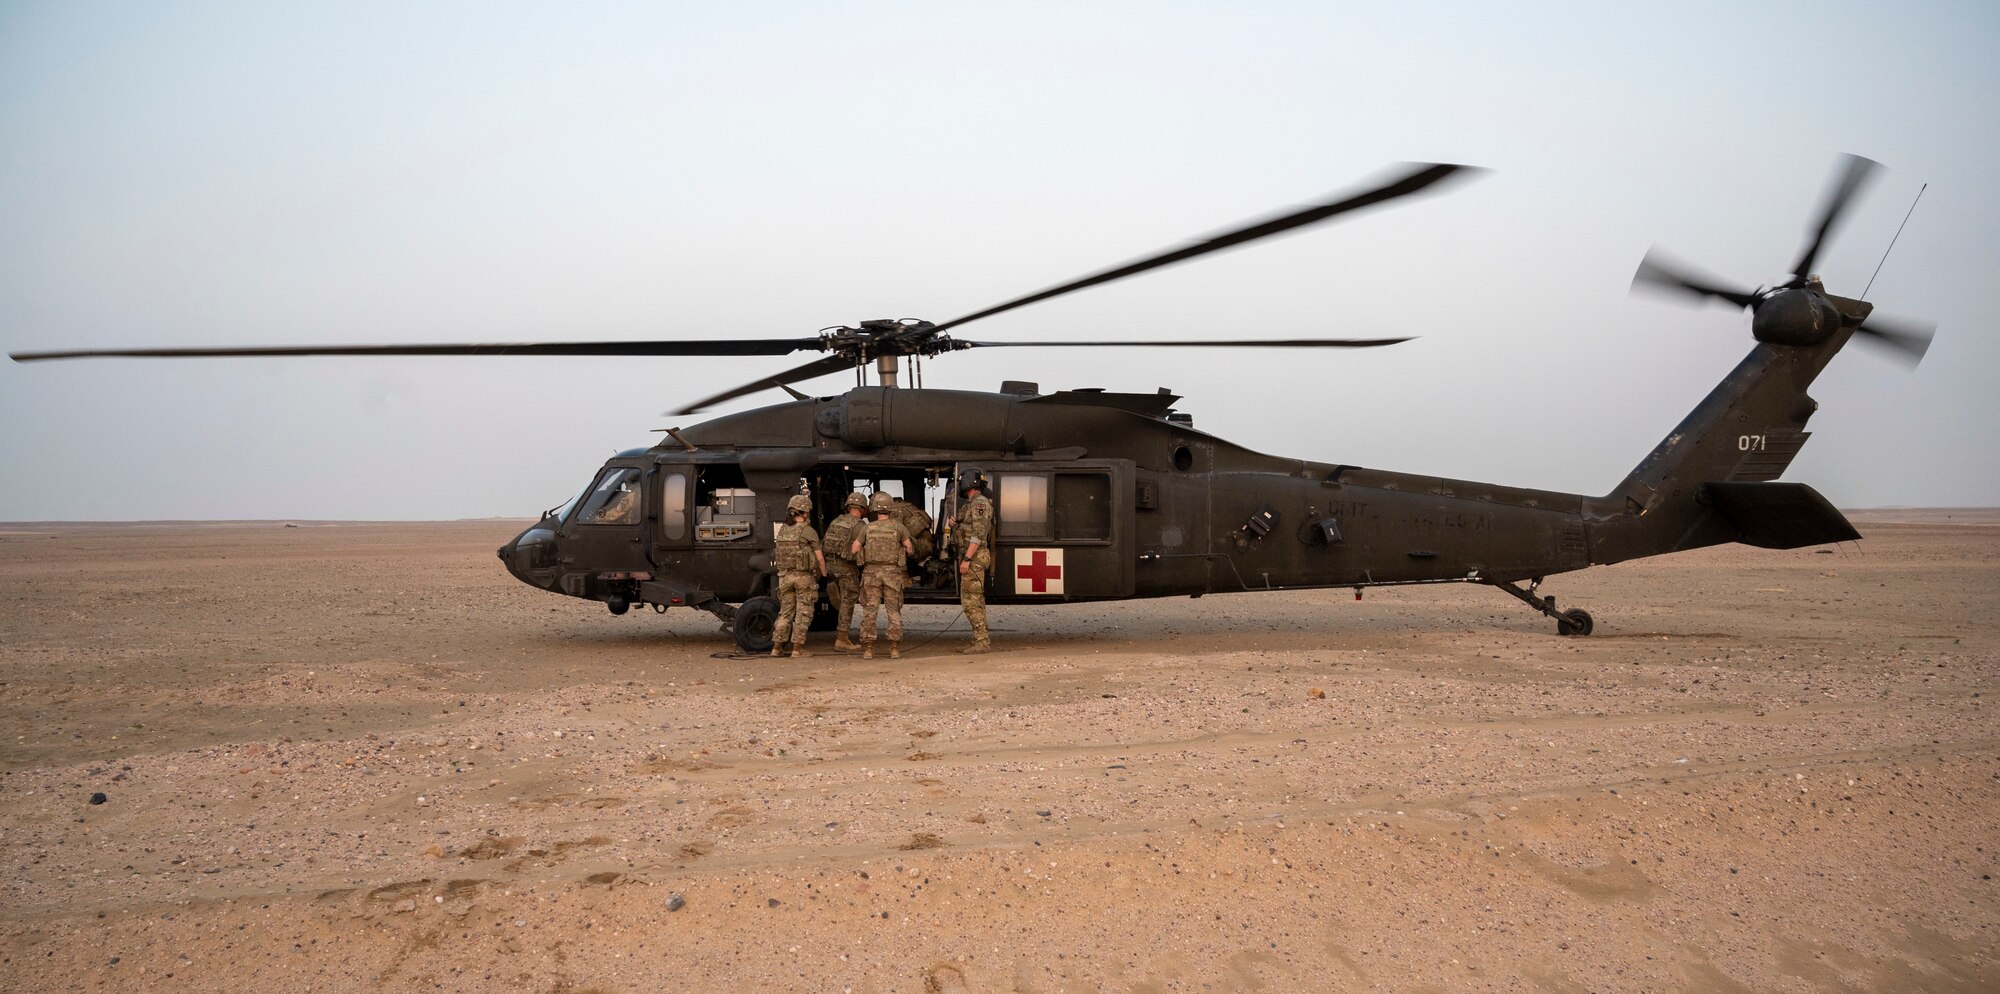 U.S. Army Soldiers offload a patient from a UH-60 Blackhawk helicopter during training at Udairi Range, Kuwait, March 14, 2023